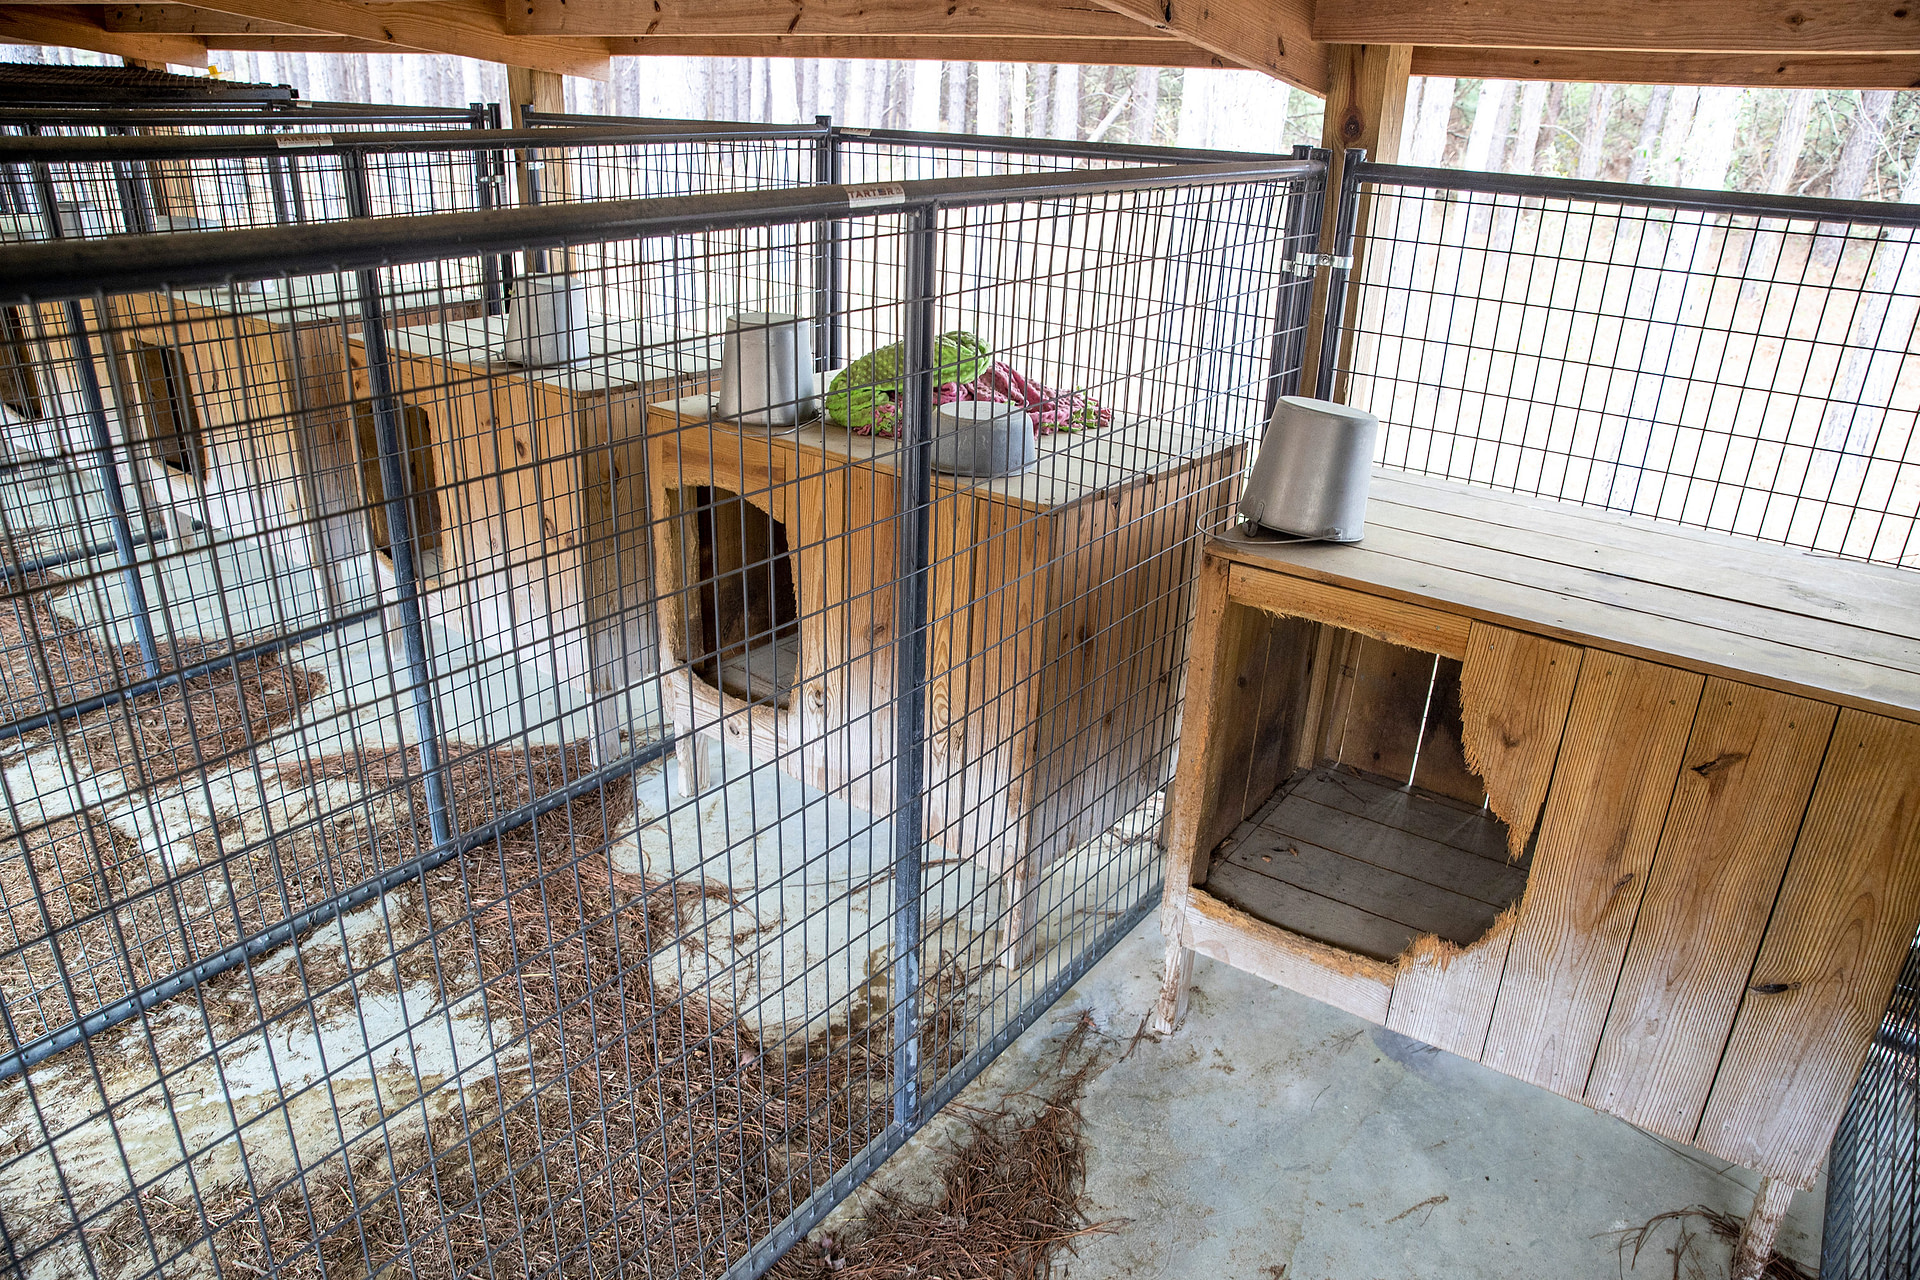 Dog kennels at the Murdaugh’s Moselle property in Islandton, South Carolina.